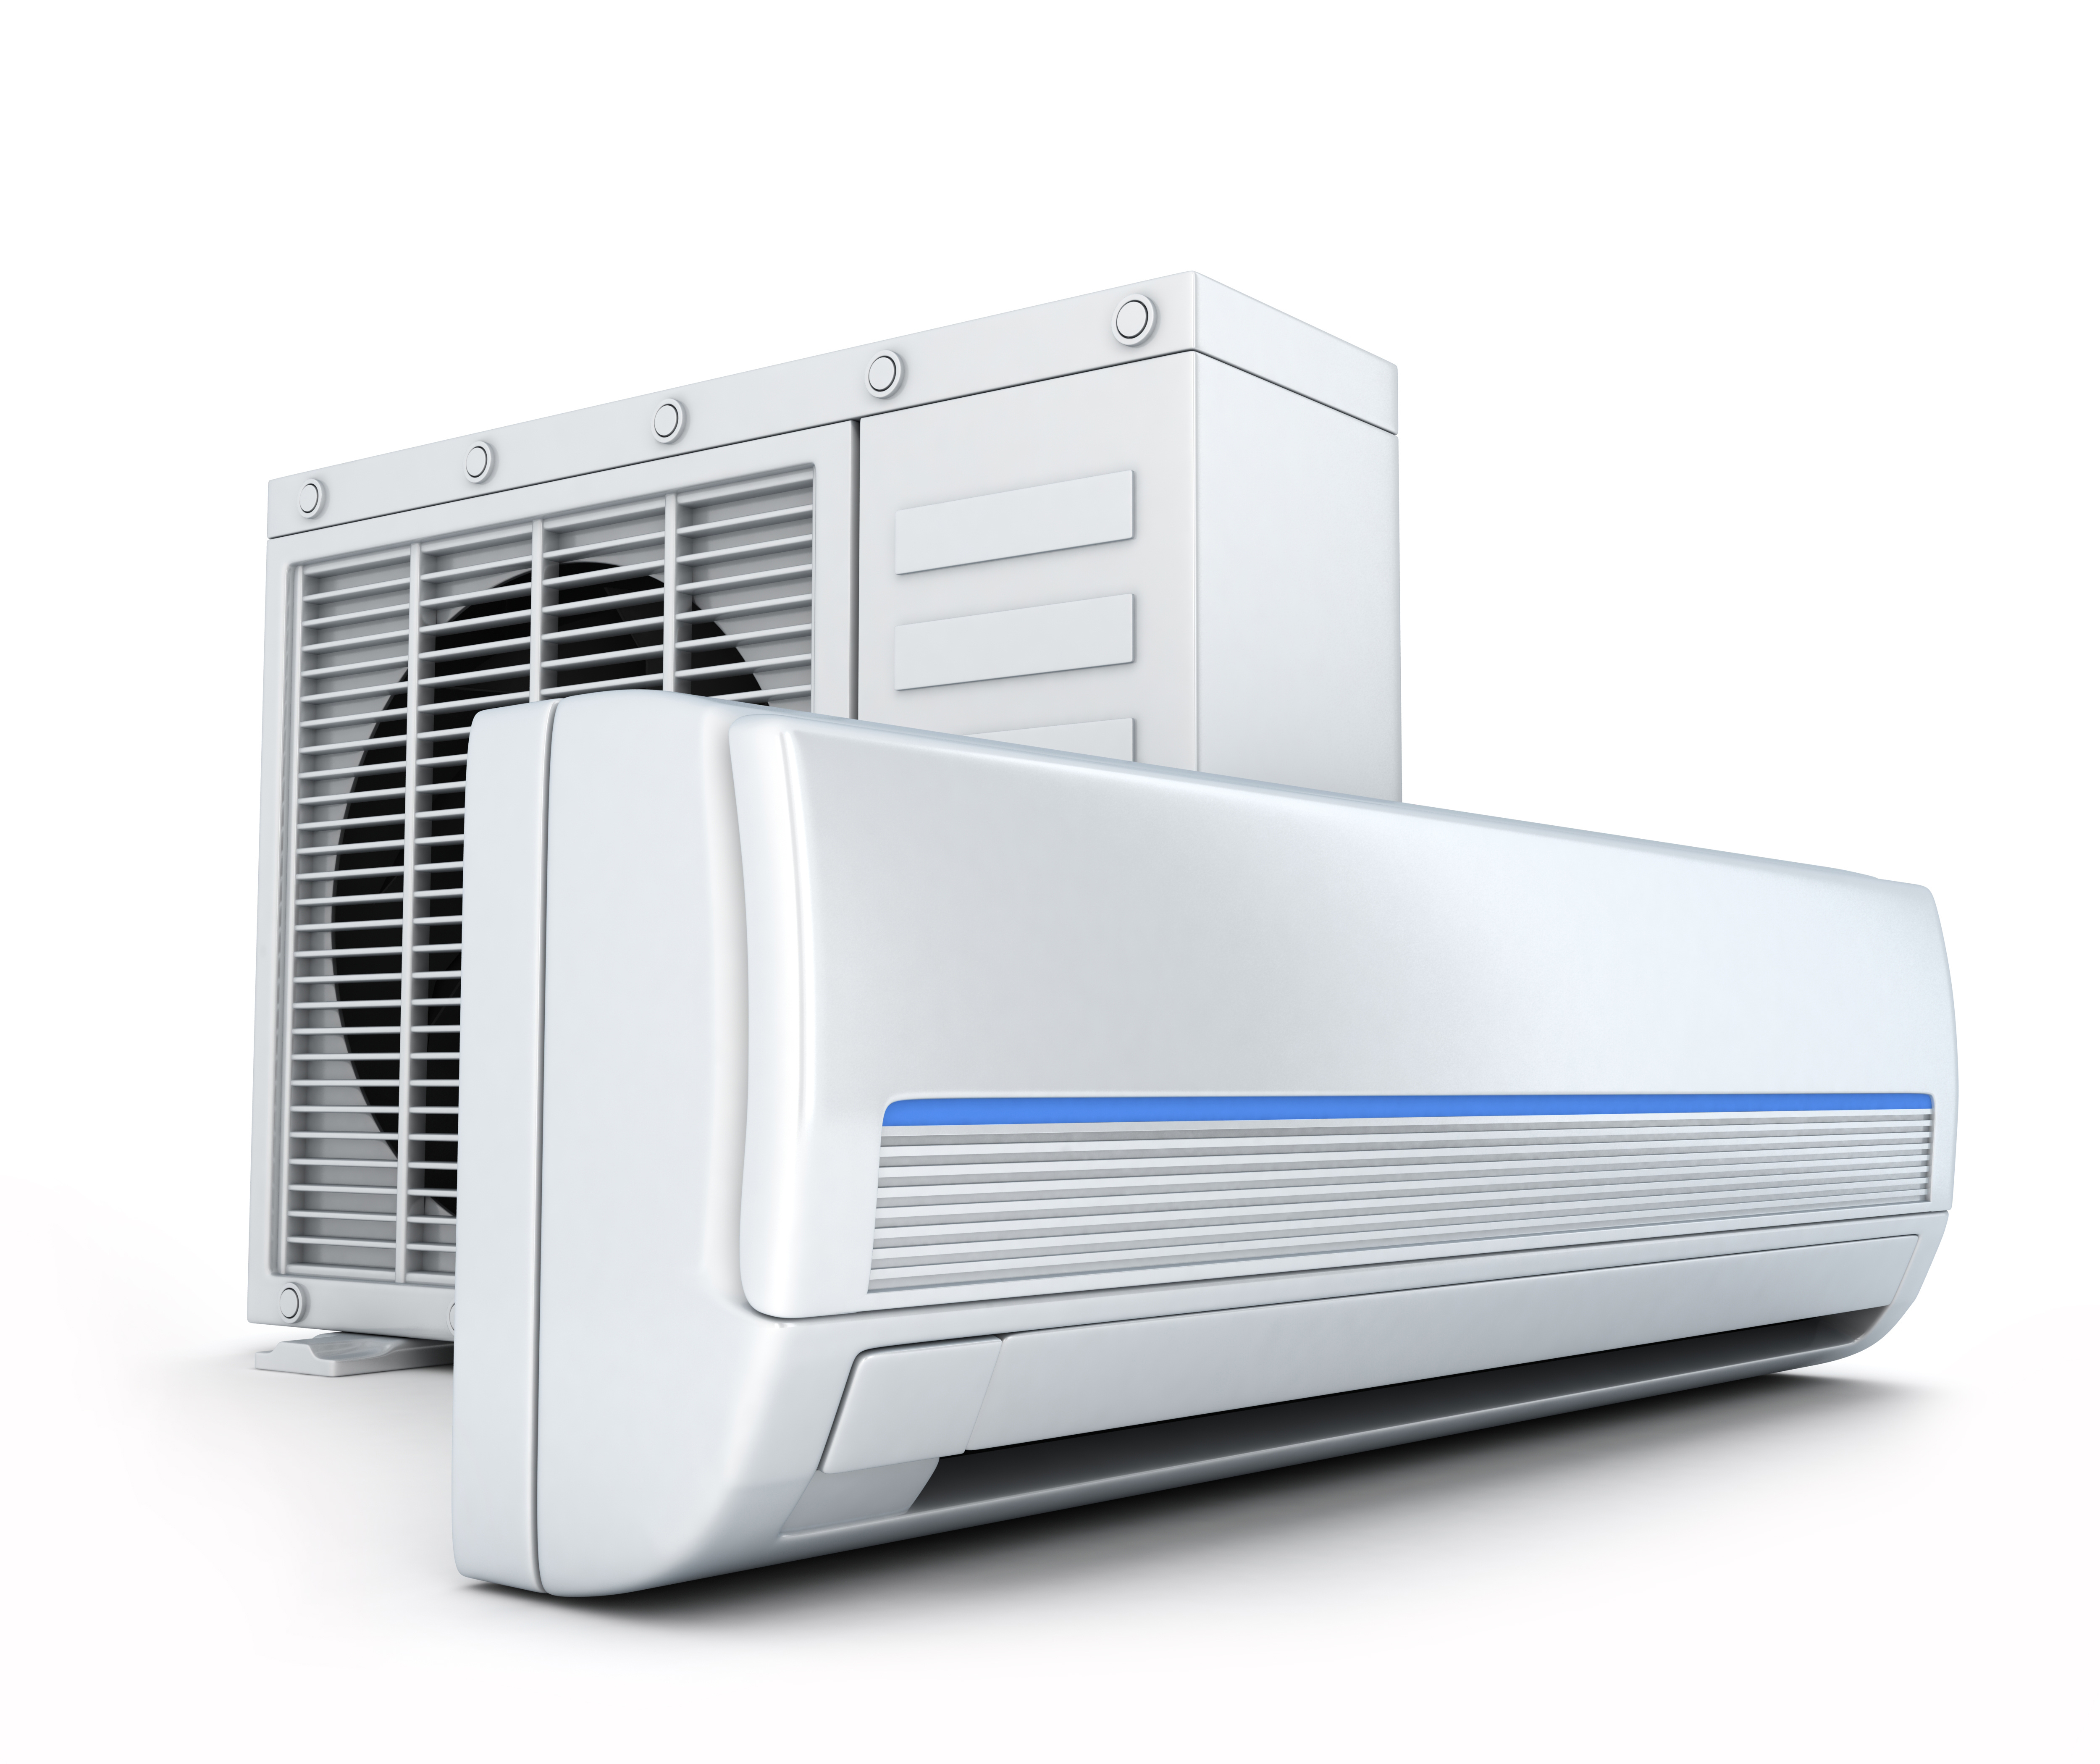 How Long Does Refrigerant Typically Last In An Air Conditioner?